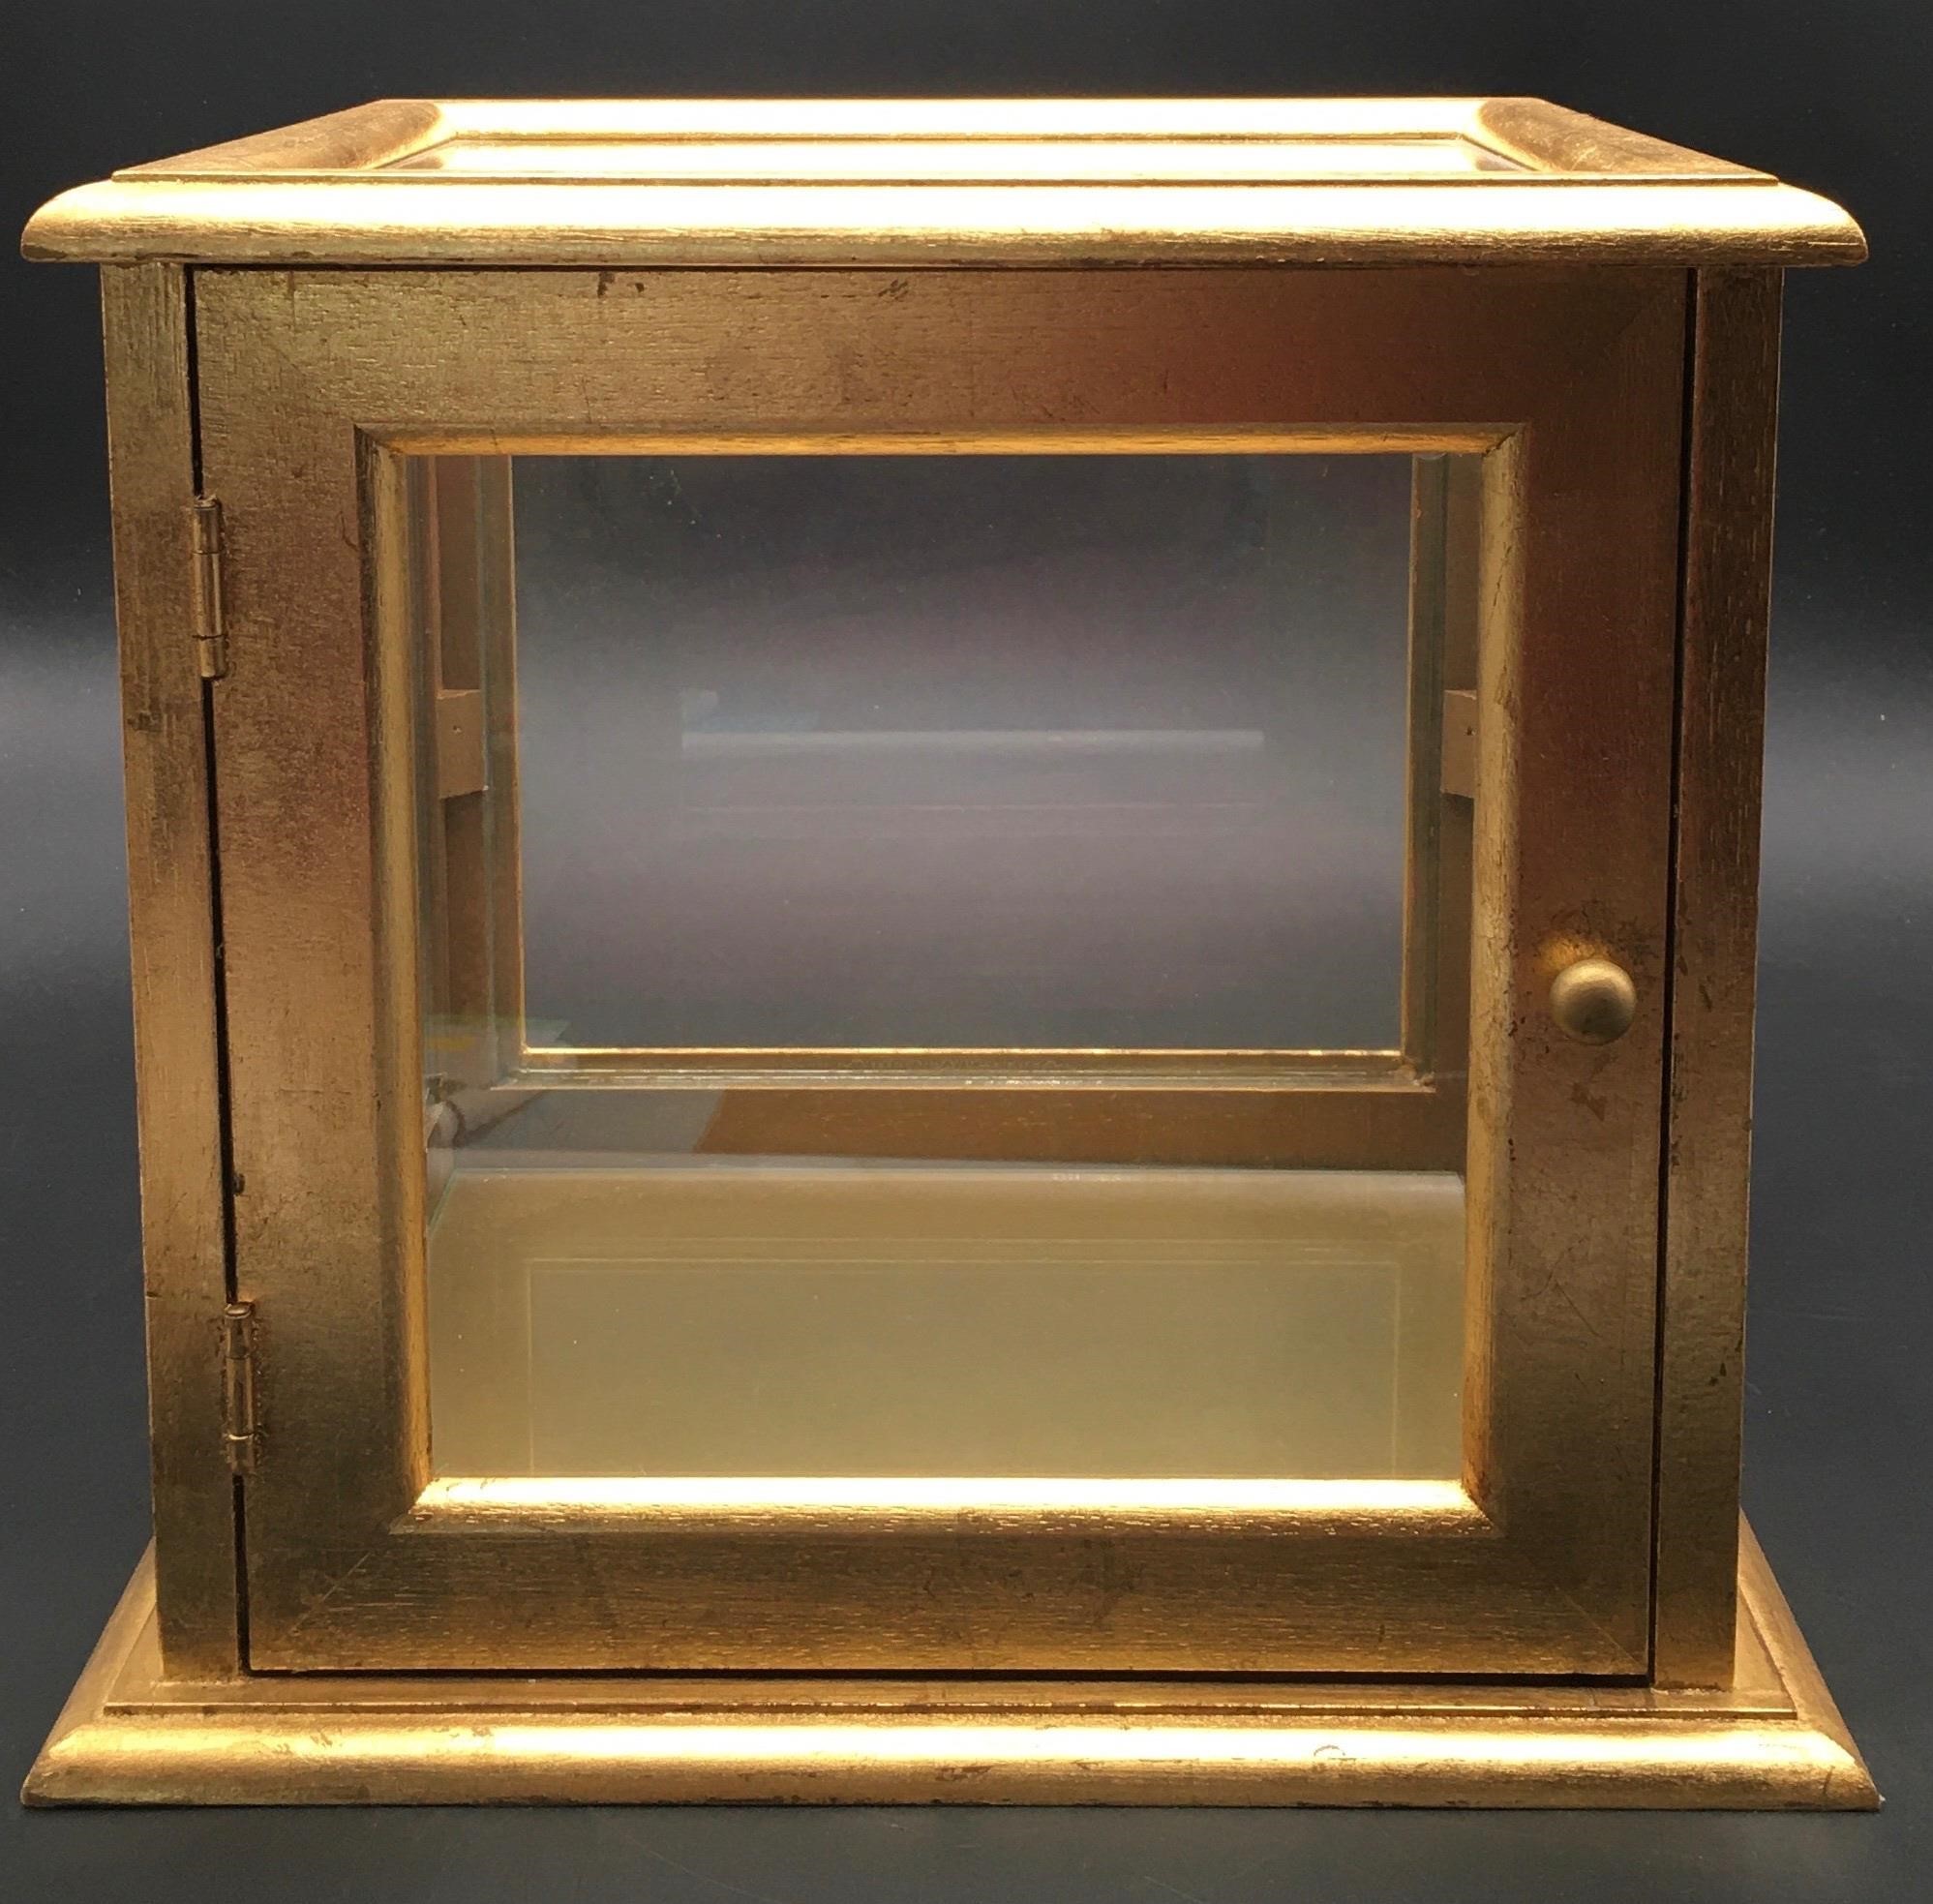 Wooden Gold/Glass Display Box